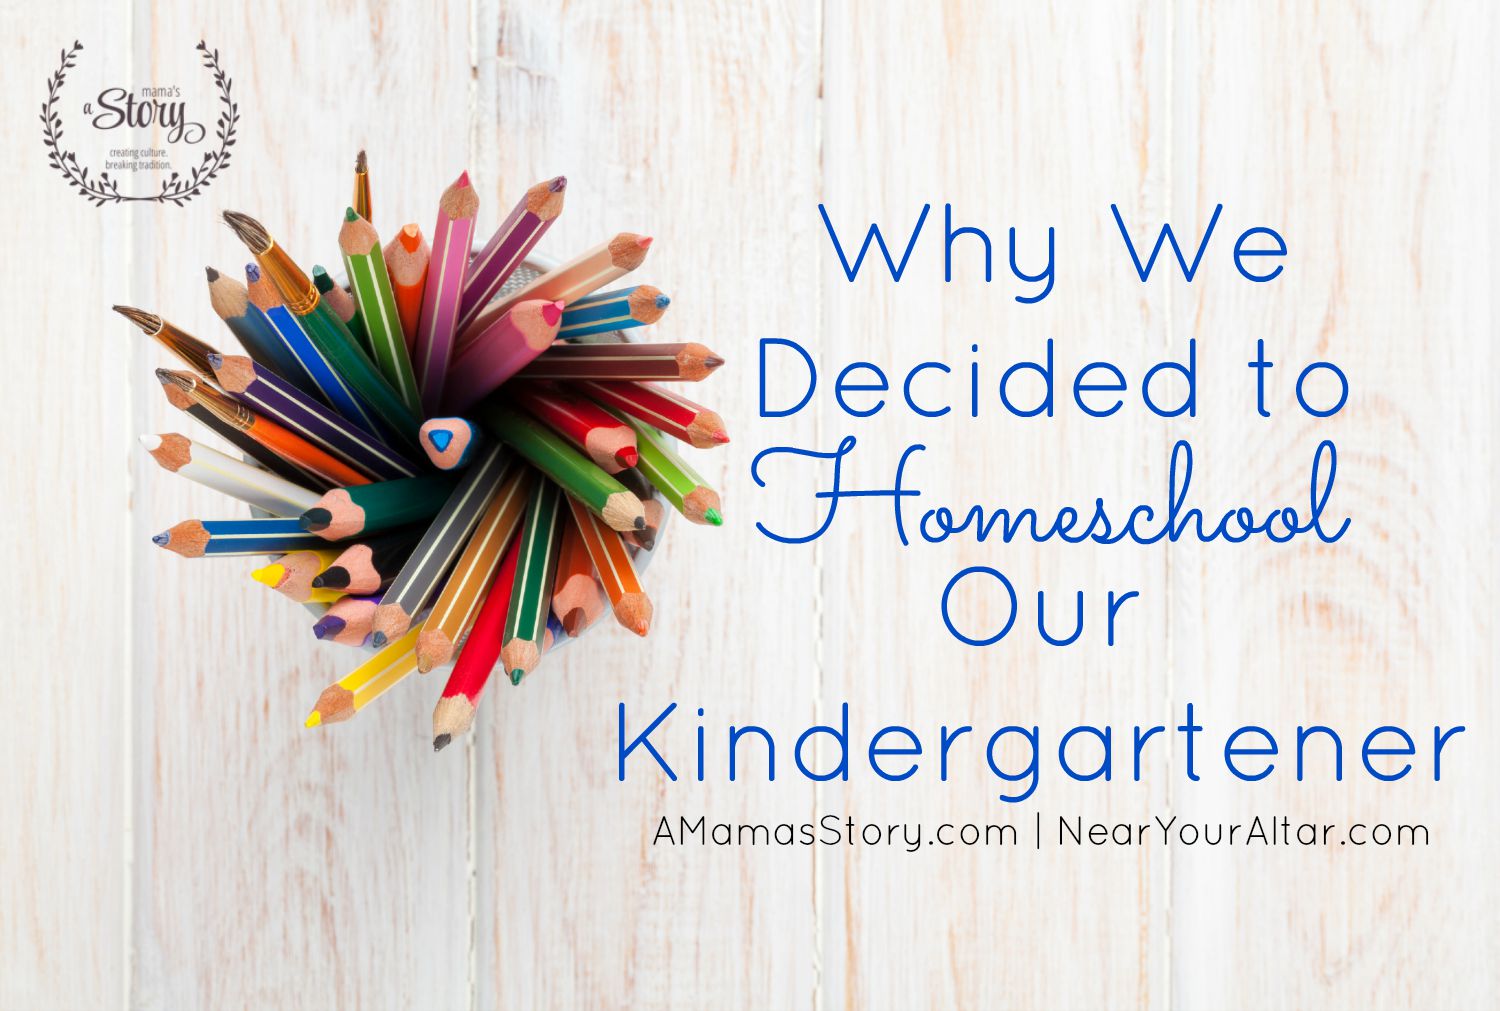 Why We Decided to Homeschool Our Kindergartener